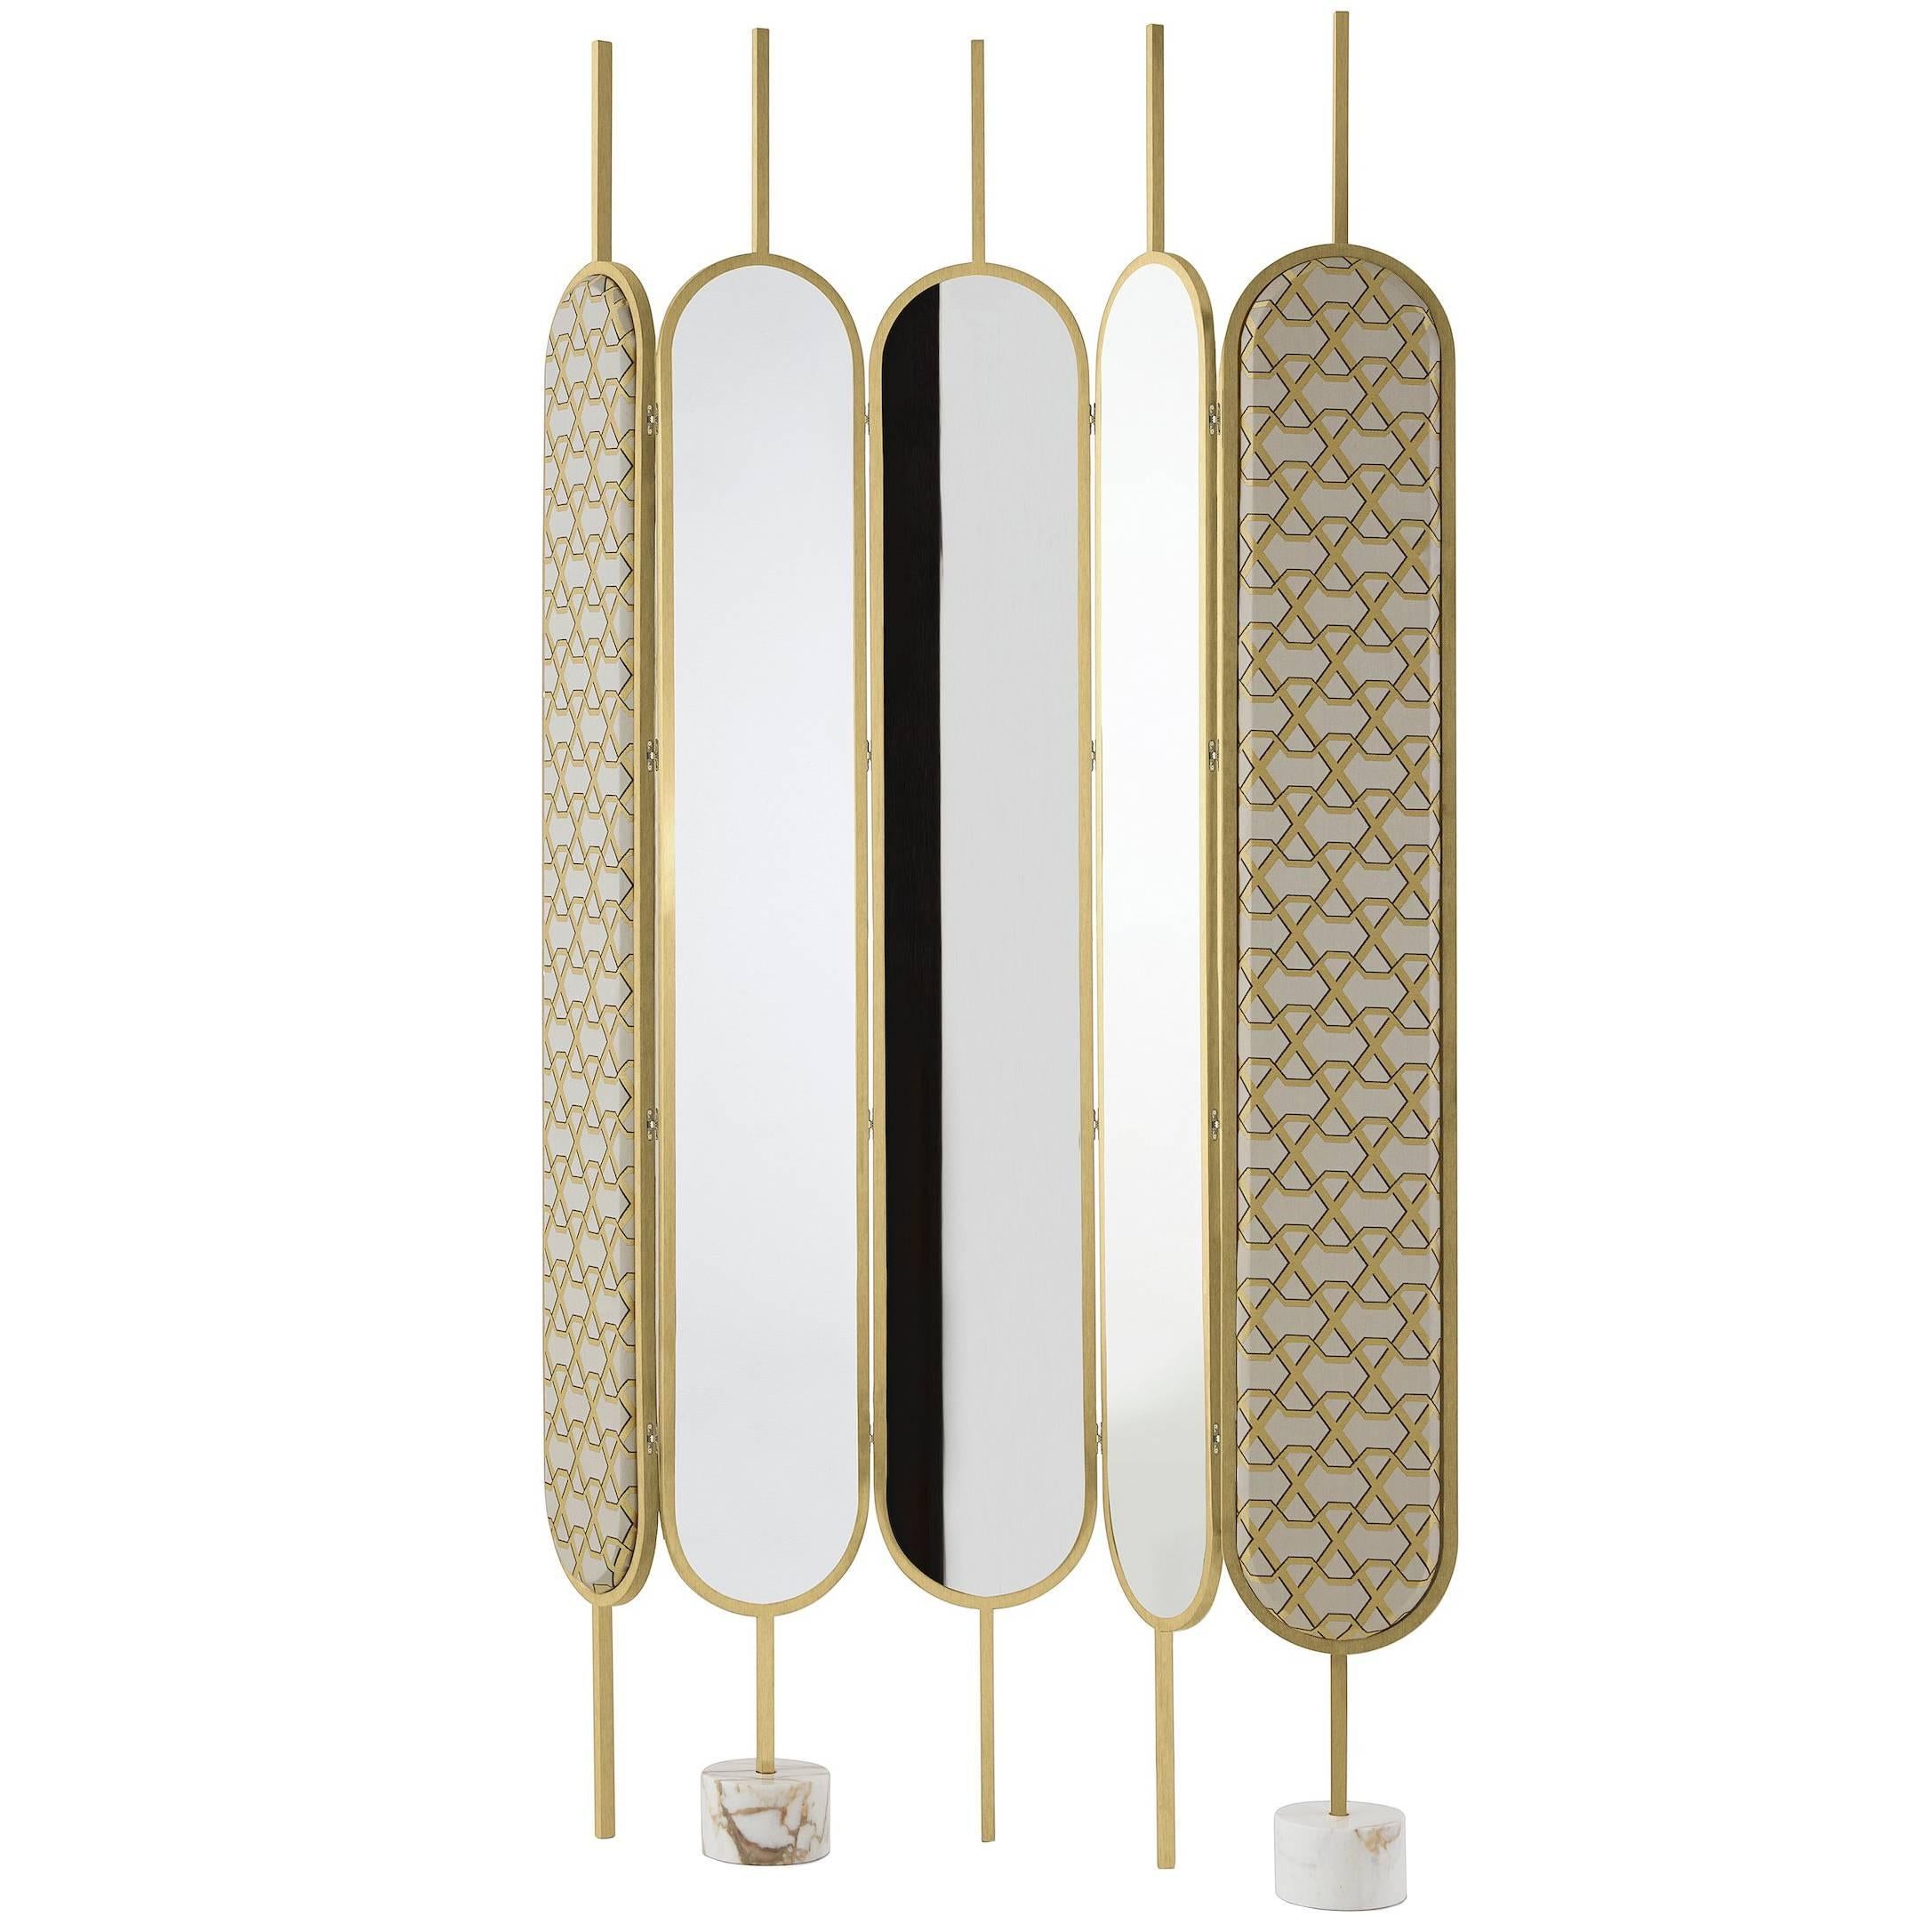 Gallotti & Radice Chloé Screen/Mirror in Brass Finish with Fabric Panels For Sale